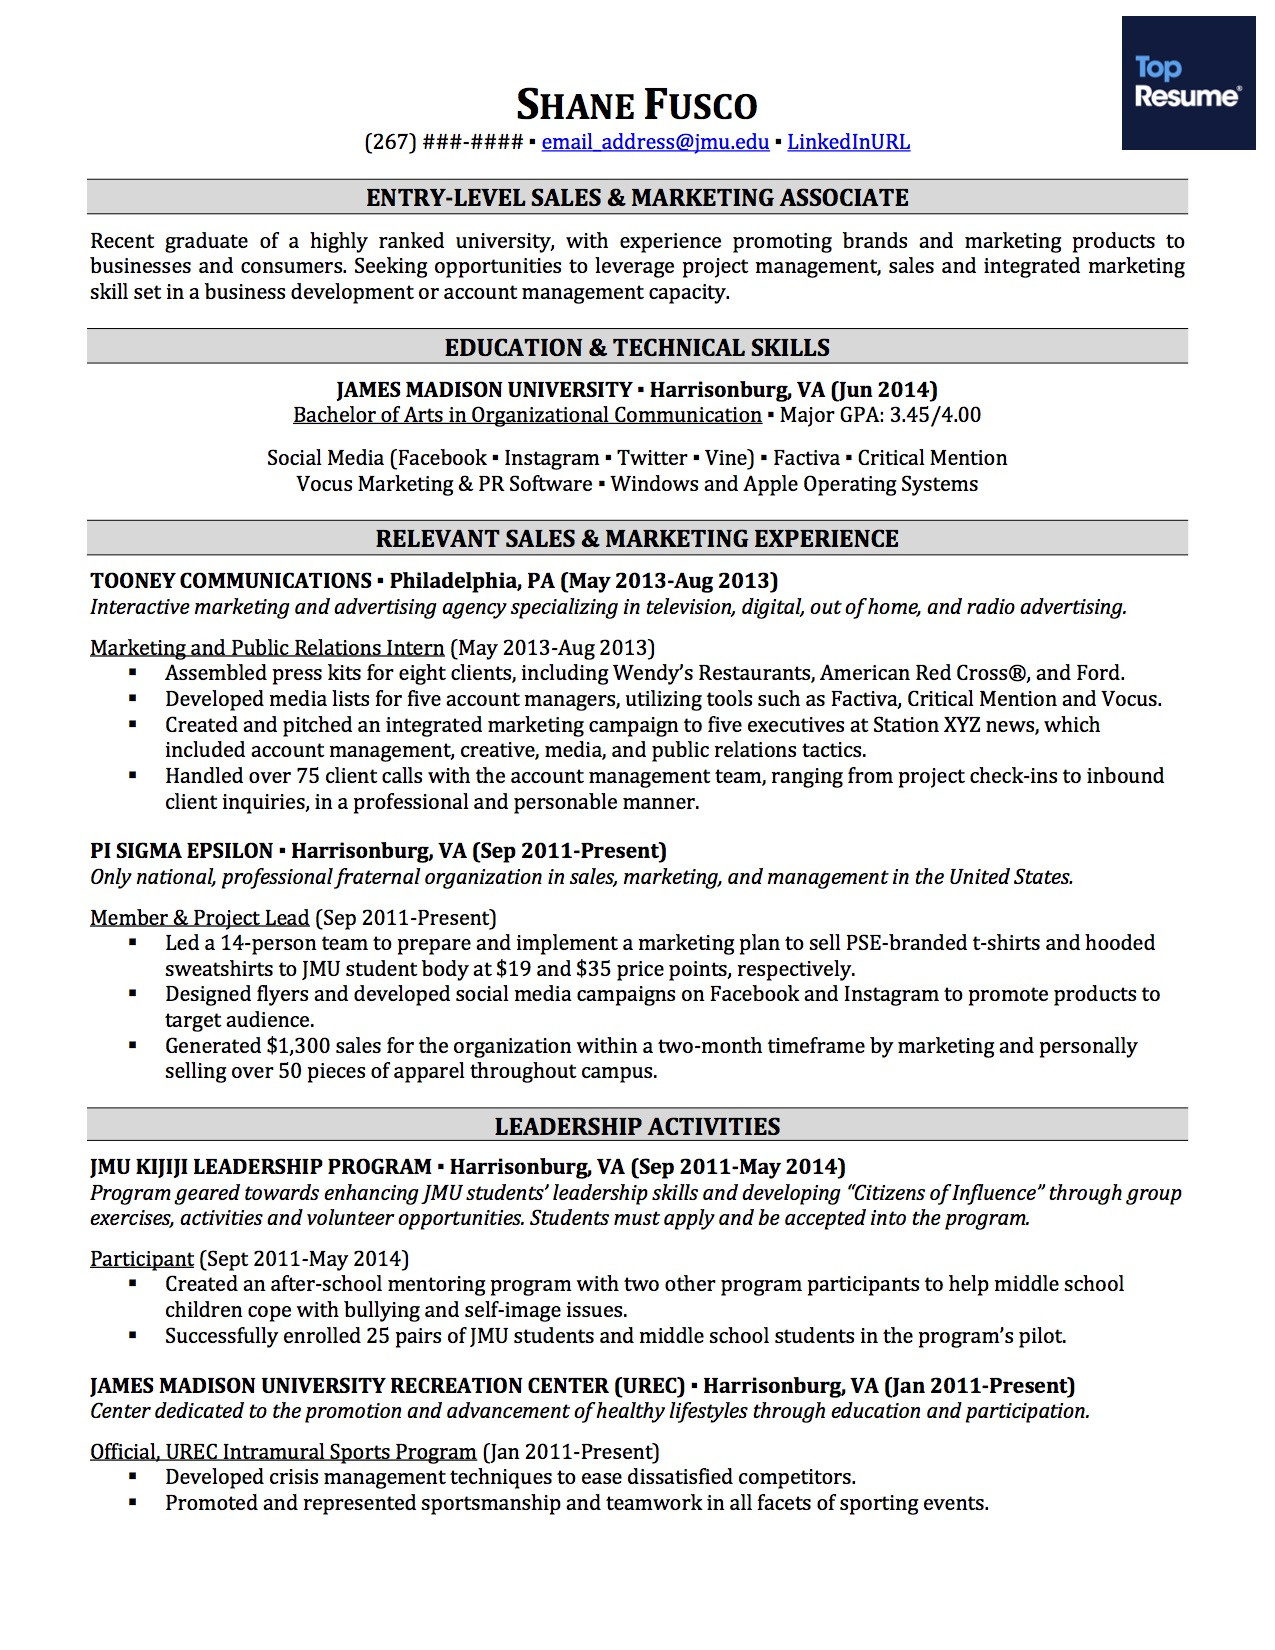 Sample Resume with Only One Job How to Write A Resume with No Experience topresume